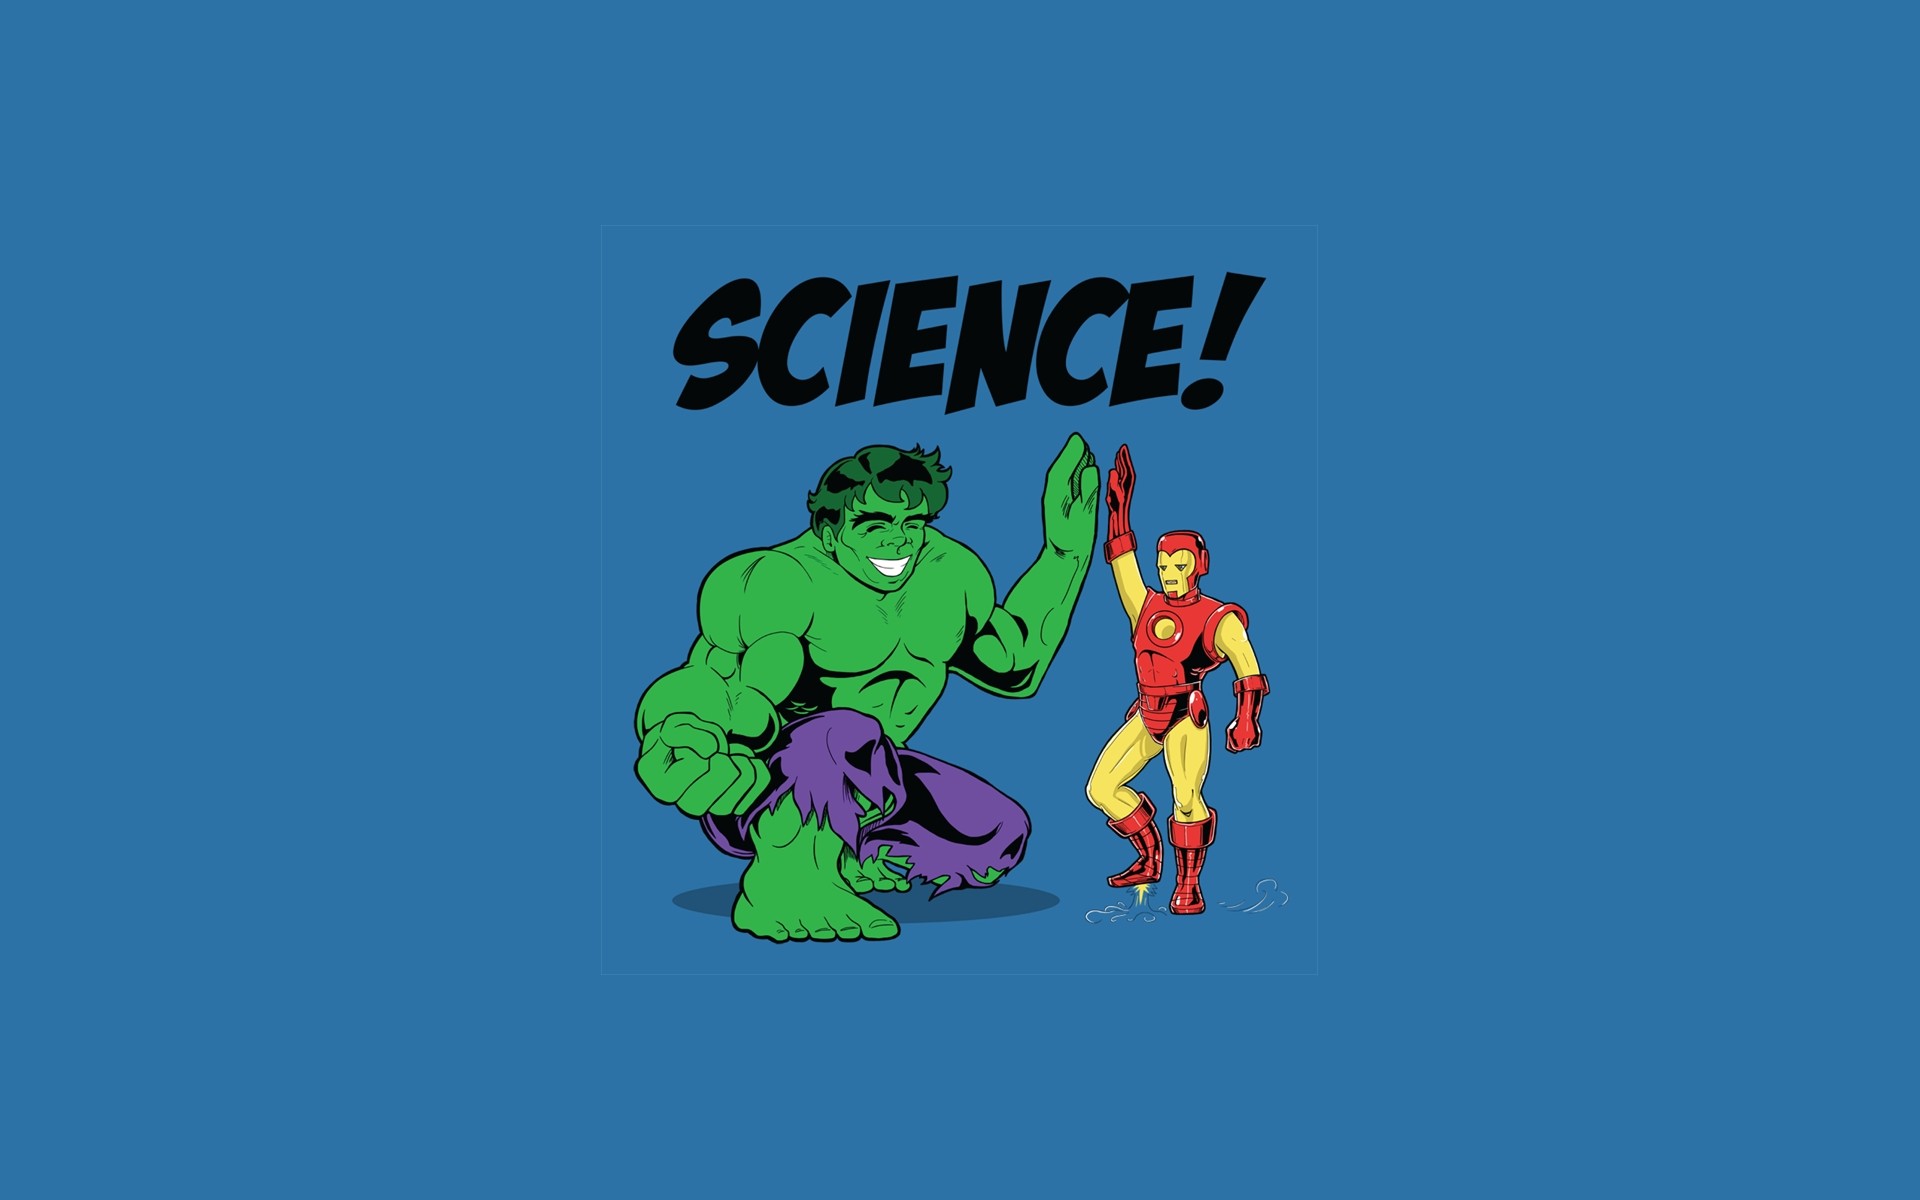  Science Google Backgrounds Hulk and Iron Man Science Google Themes 1920x1200